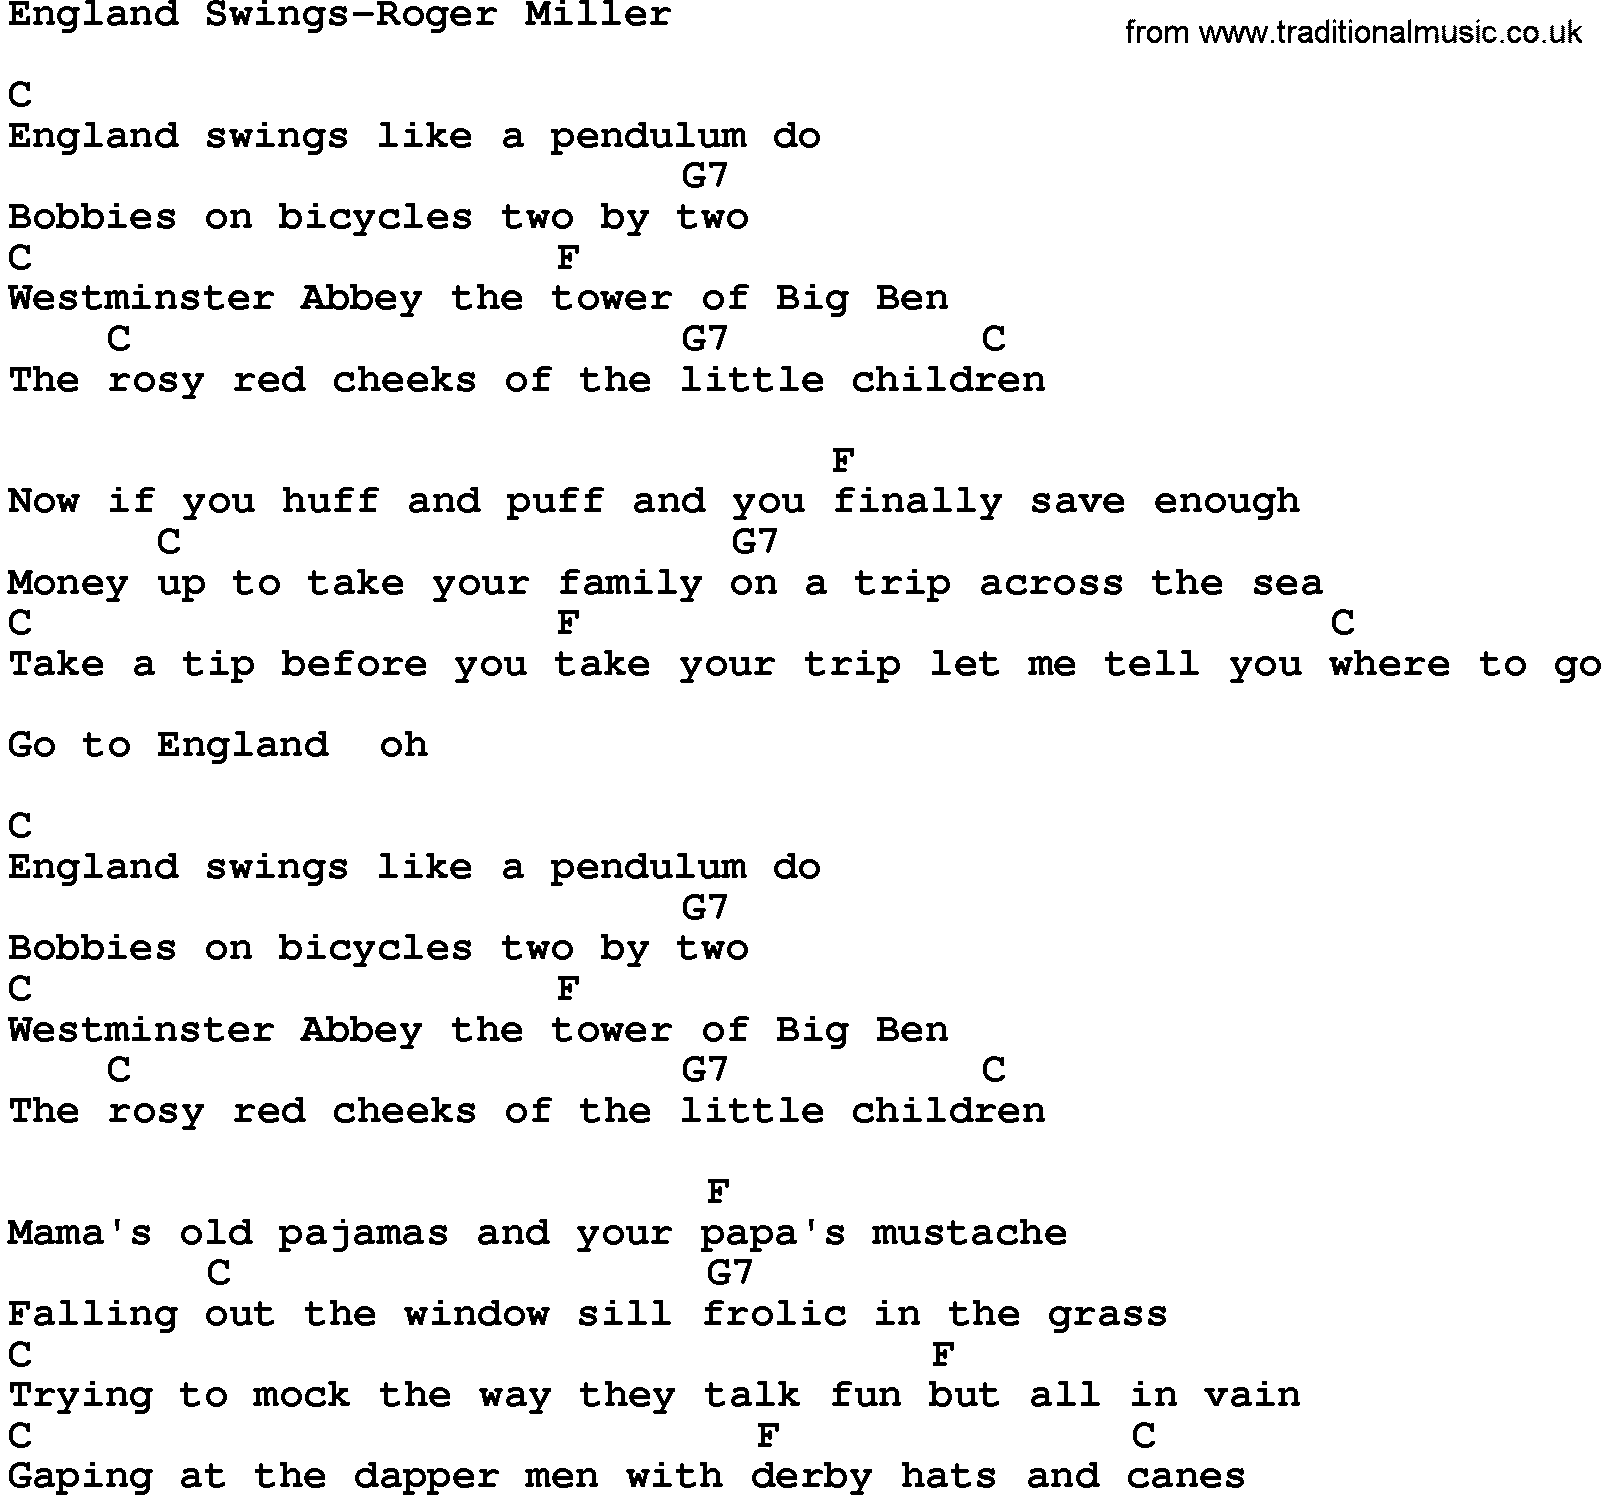 Country music song: England Swings-Roger Miller lyrics and chords